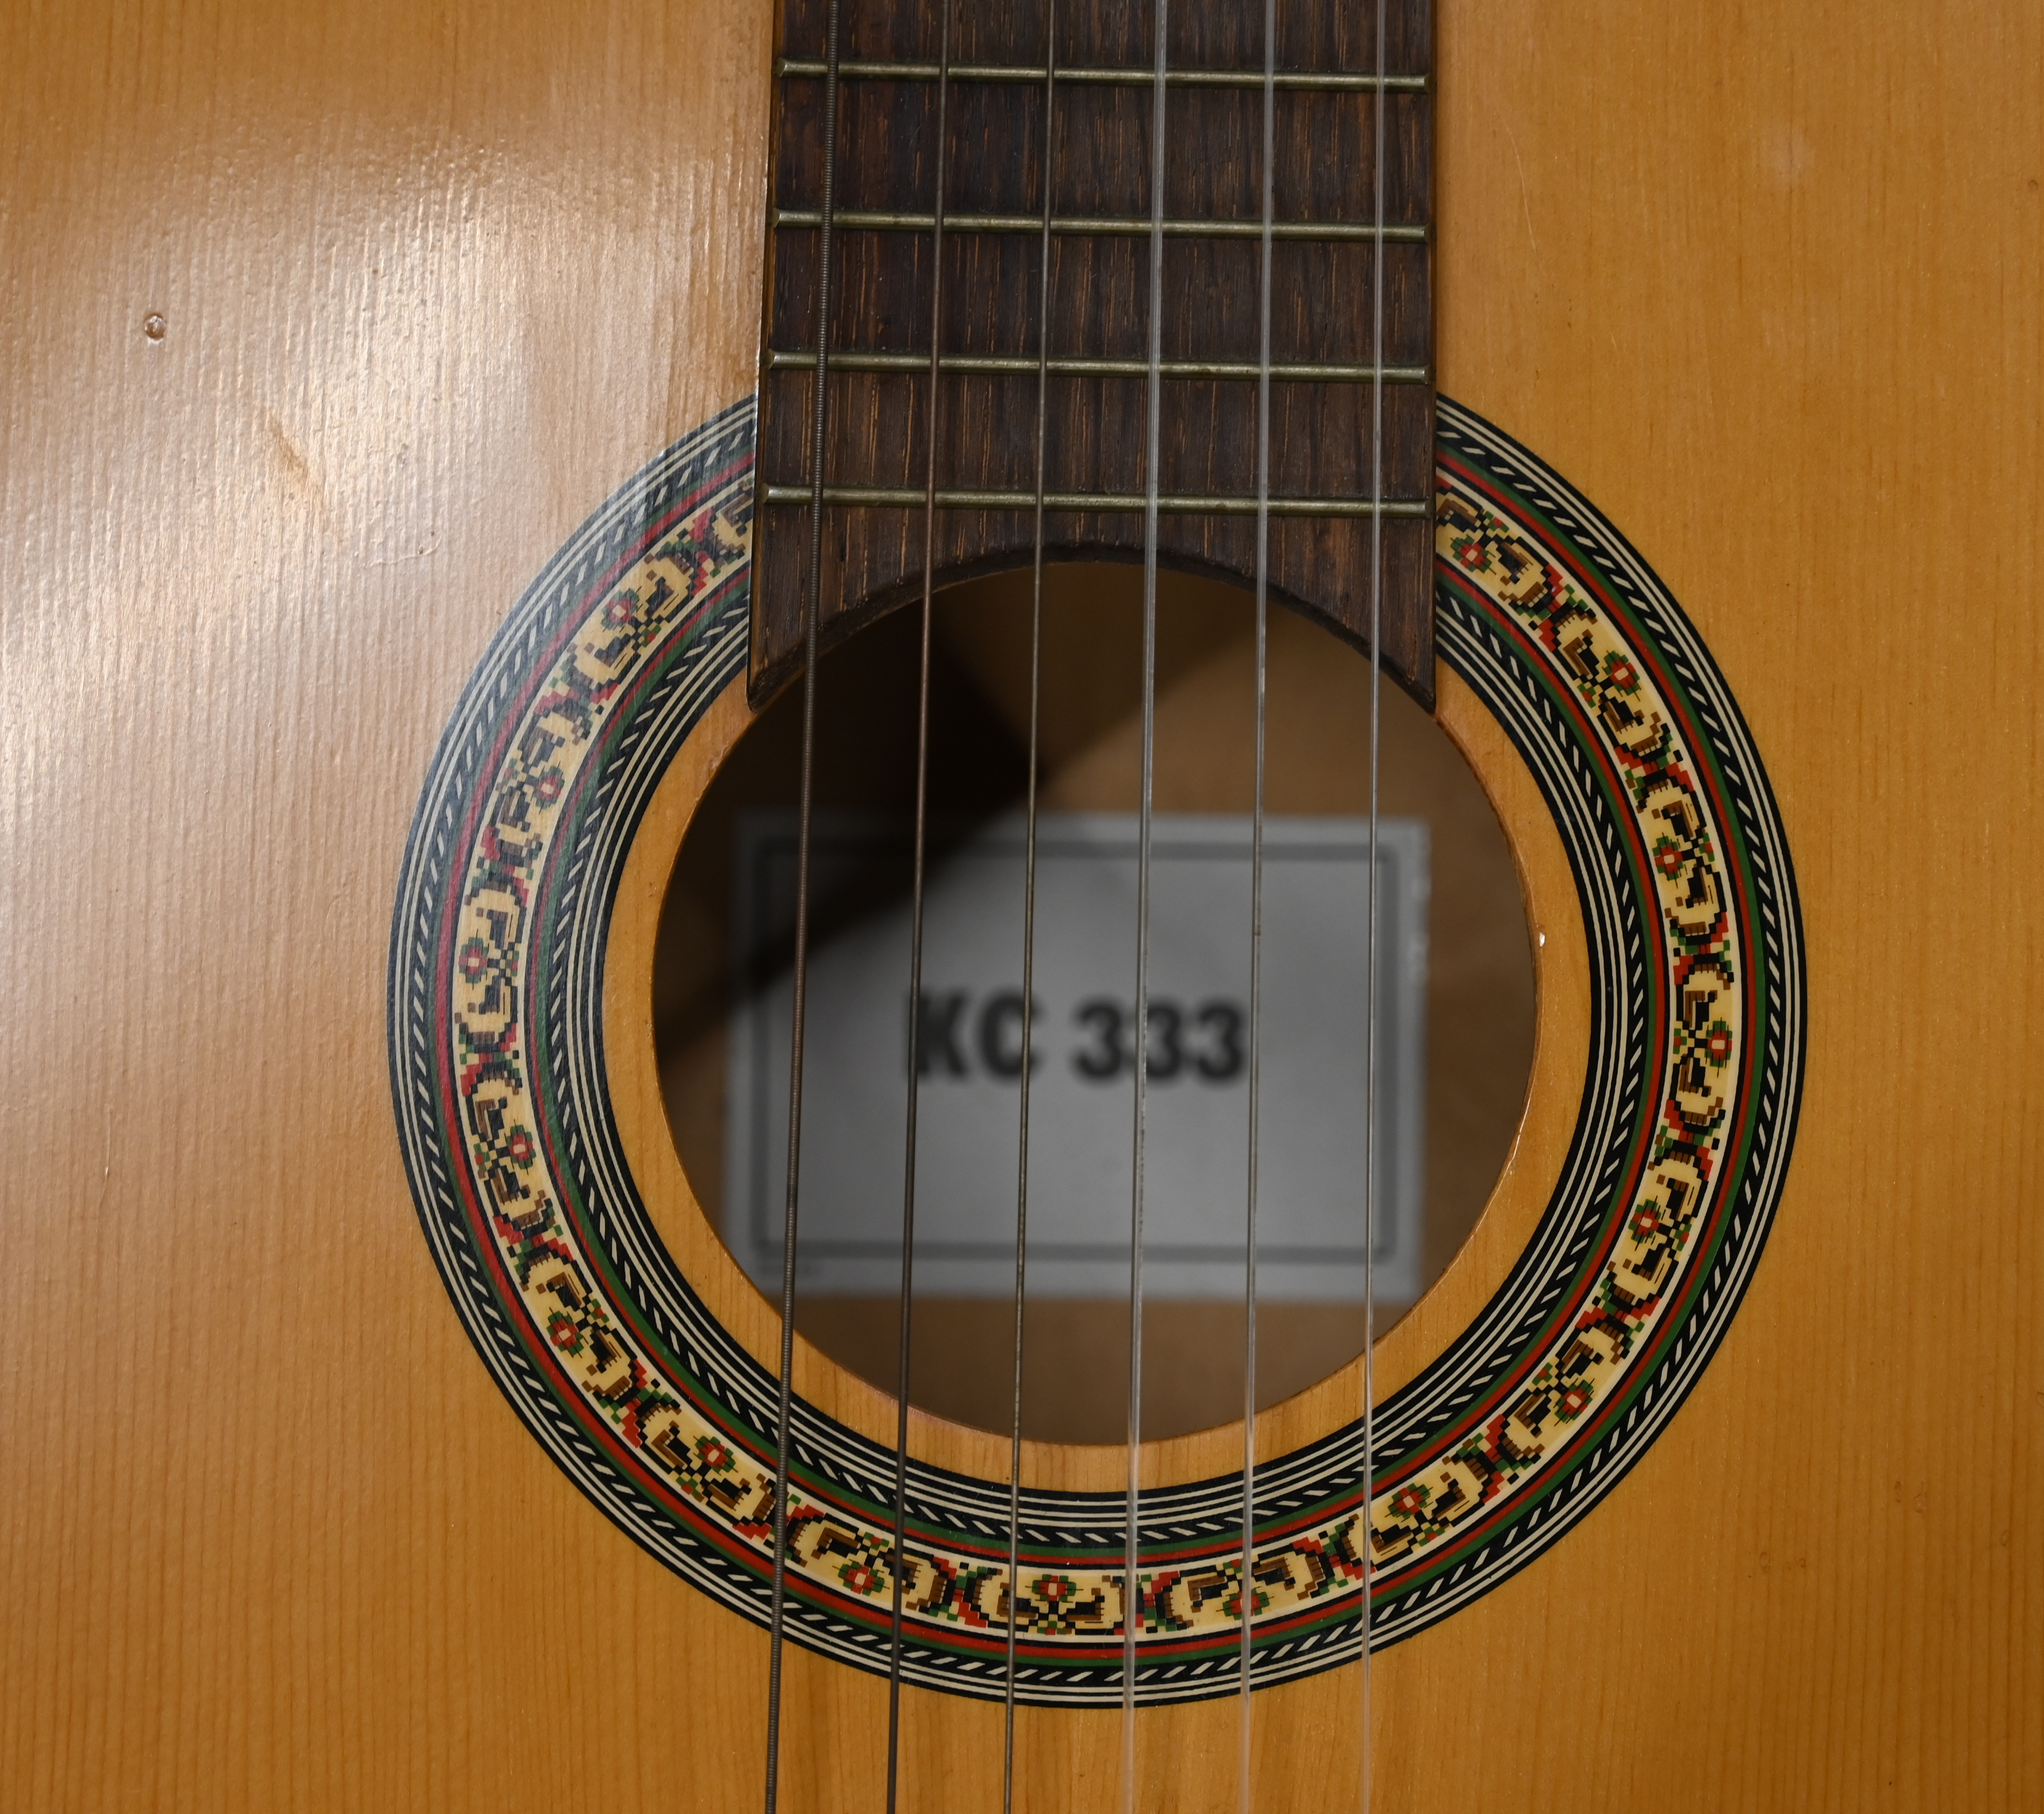 A Horner MW - 300 acoustic guitar, along with a Spanish KC 33 guitar. (2) - Image 5 of 5